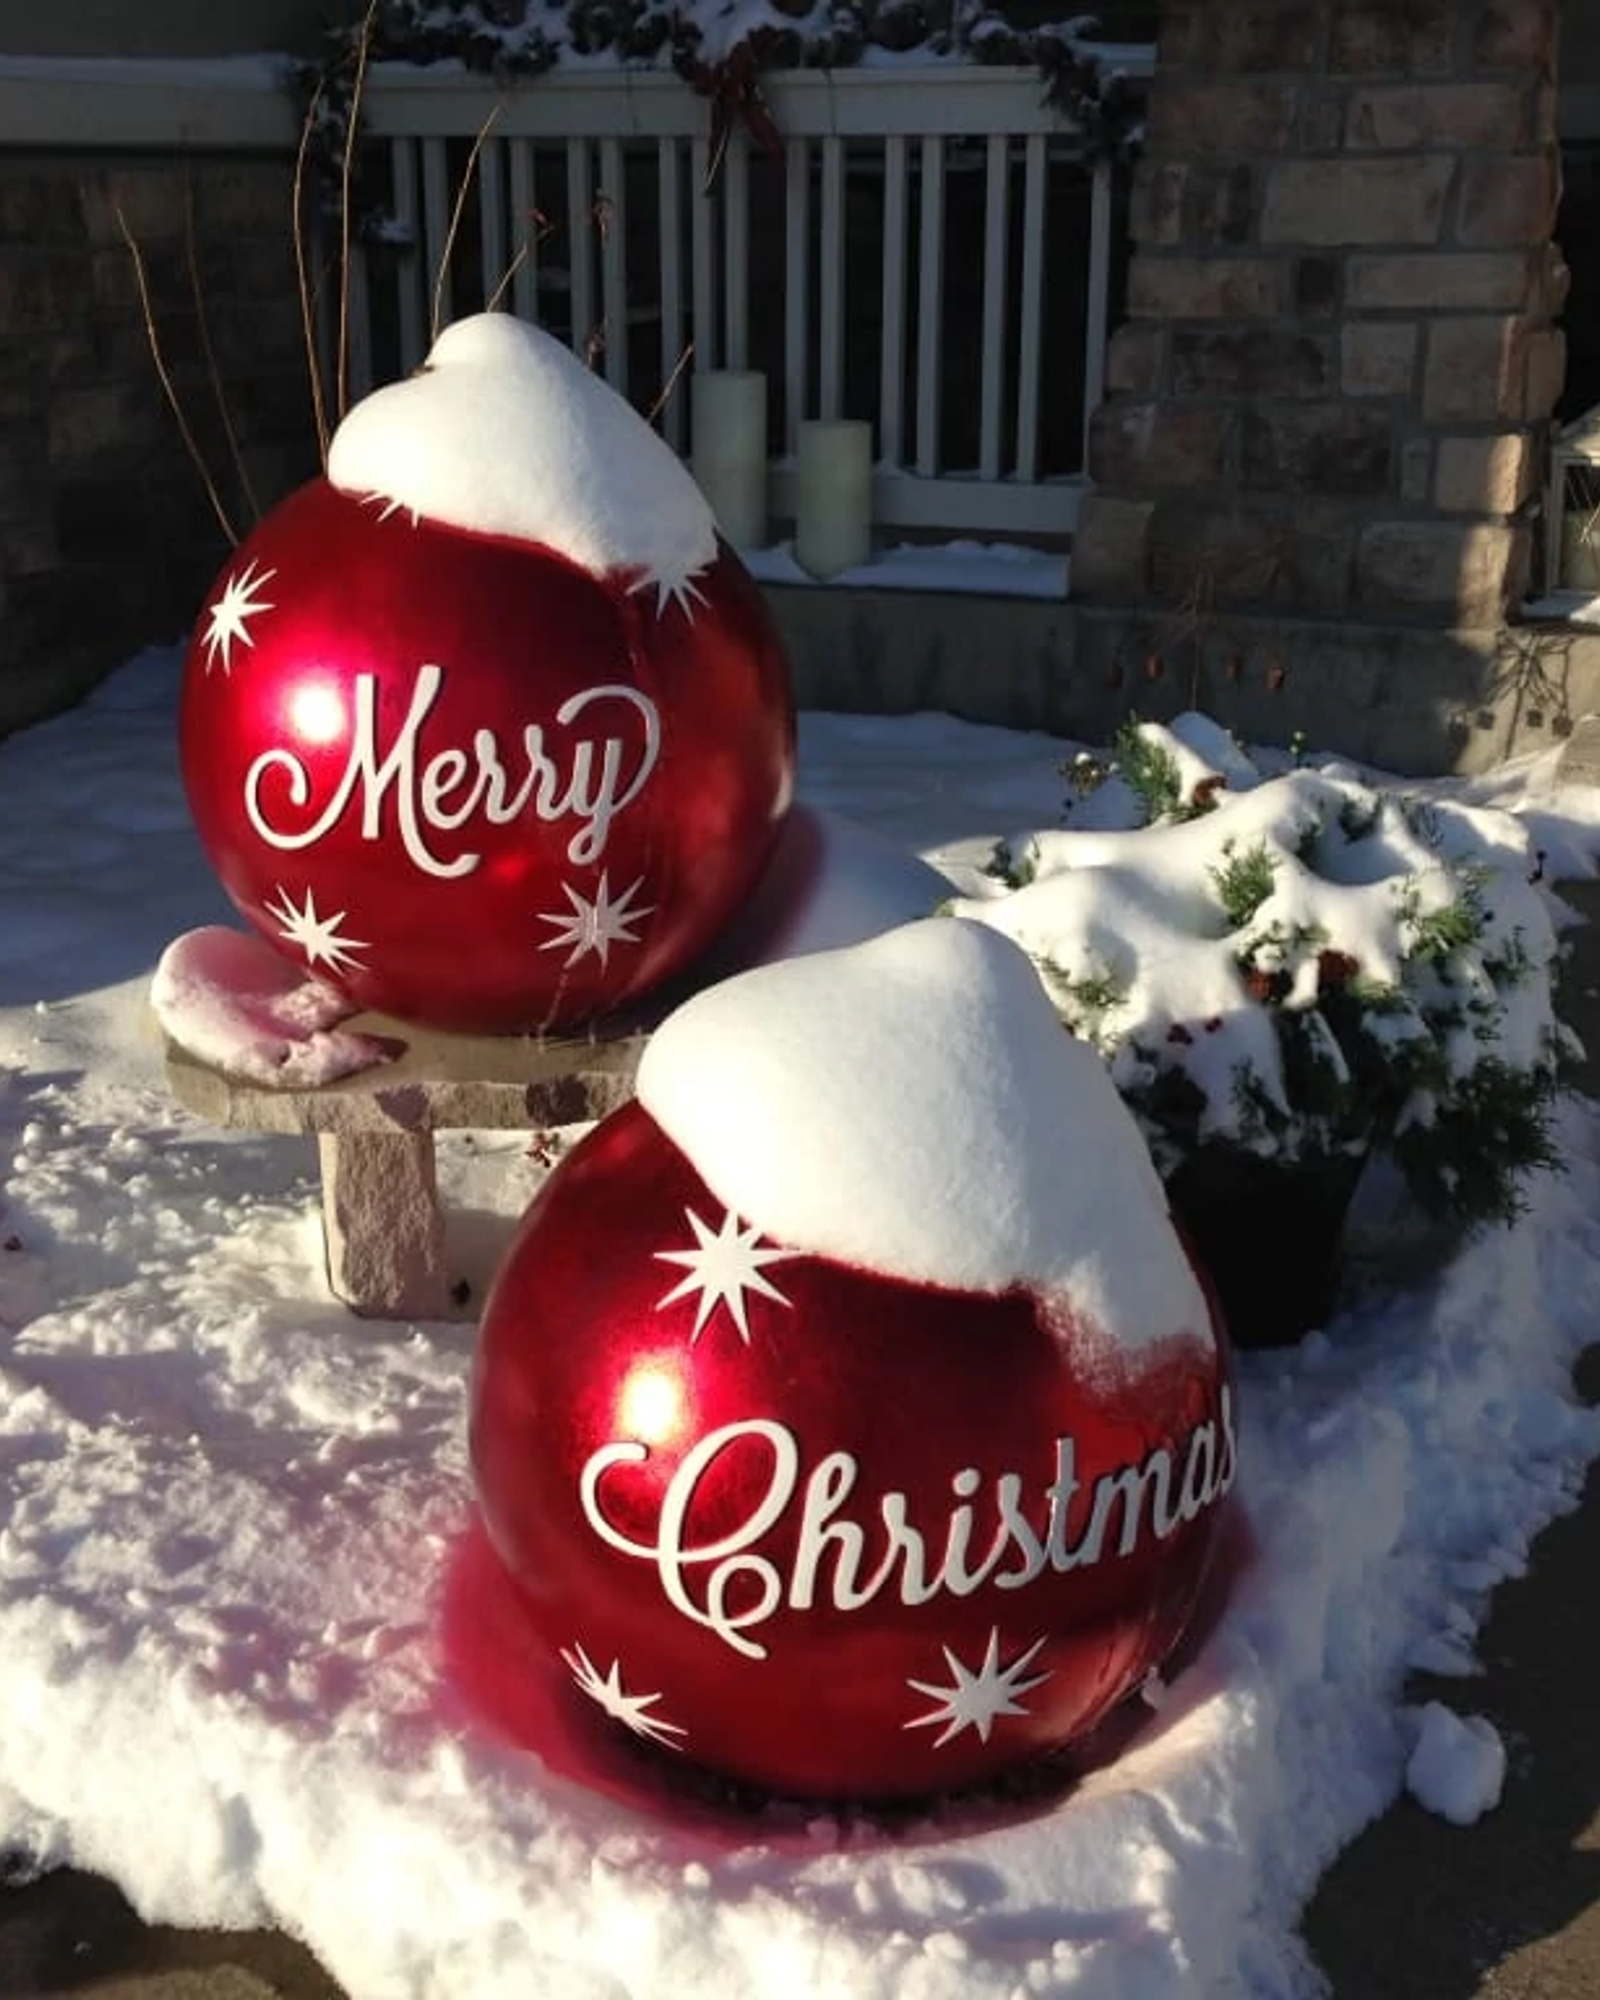 https://source.widen.net/content/qs5vkpuwjd/jpeg/OUT-1641000_Outdoor-Merry-Christmas-Ornaments_Customer-20.jpeg?w=1600&h=2000&keep=c&crop=yes&color=cccccc&quality=100&u=7mzq6p